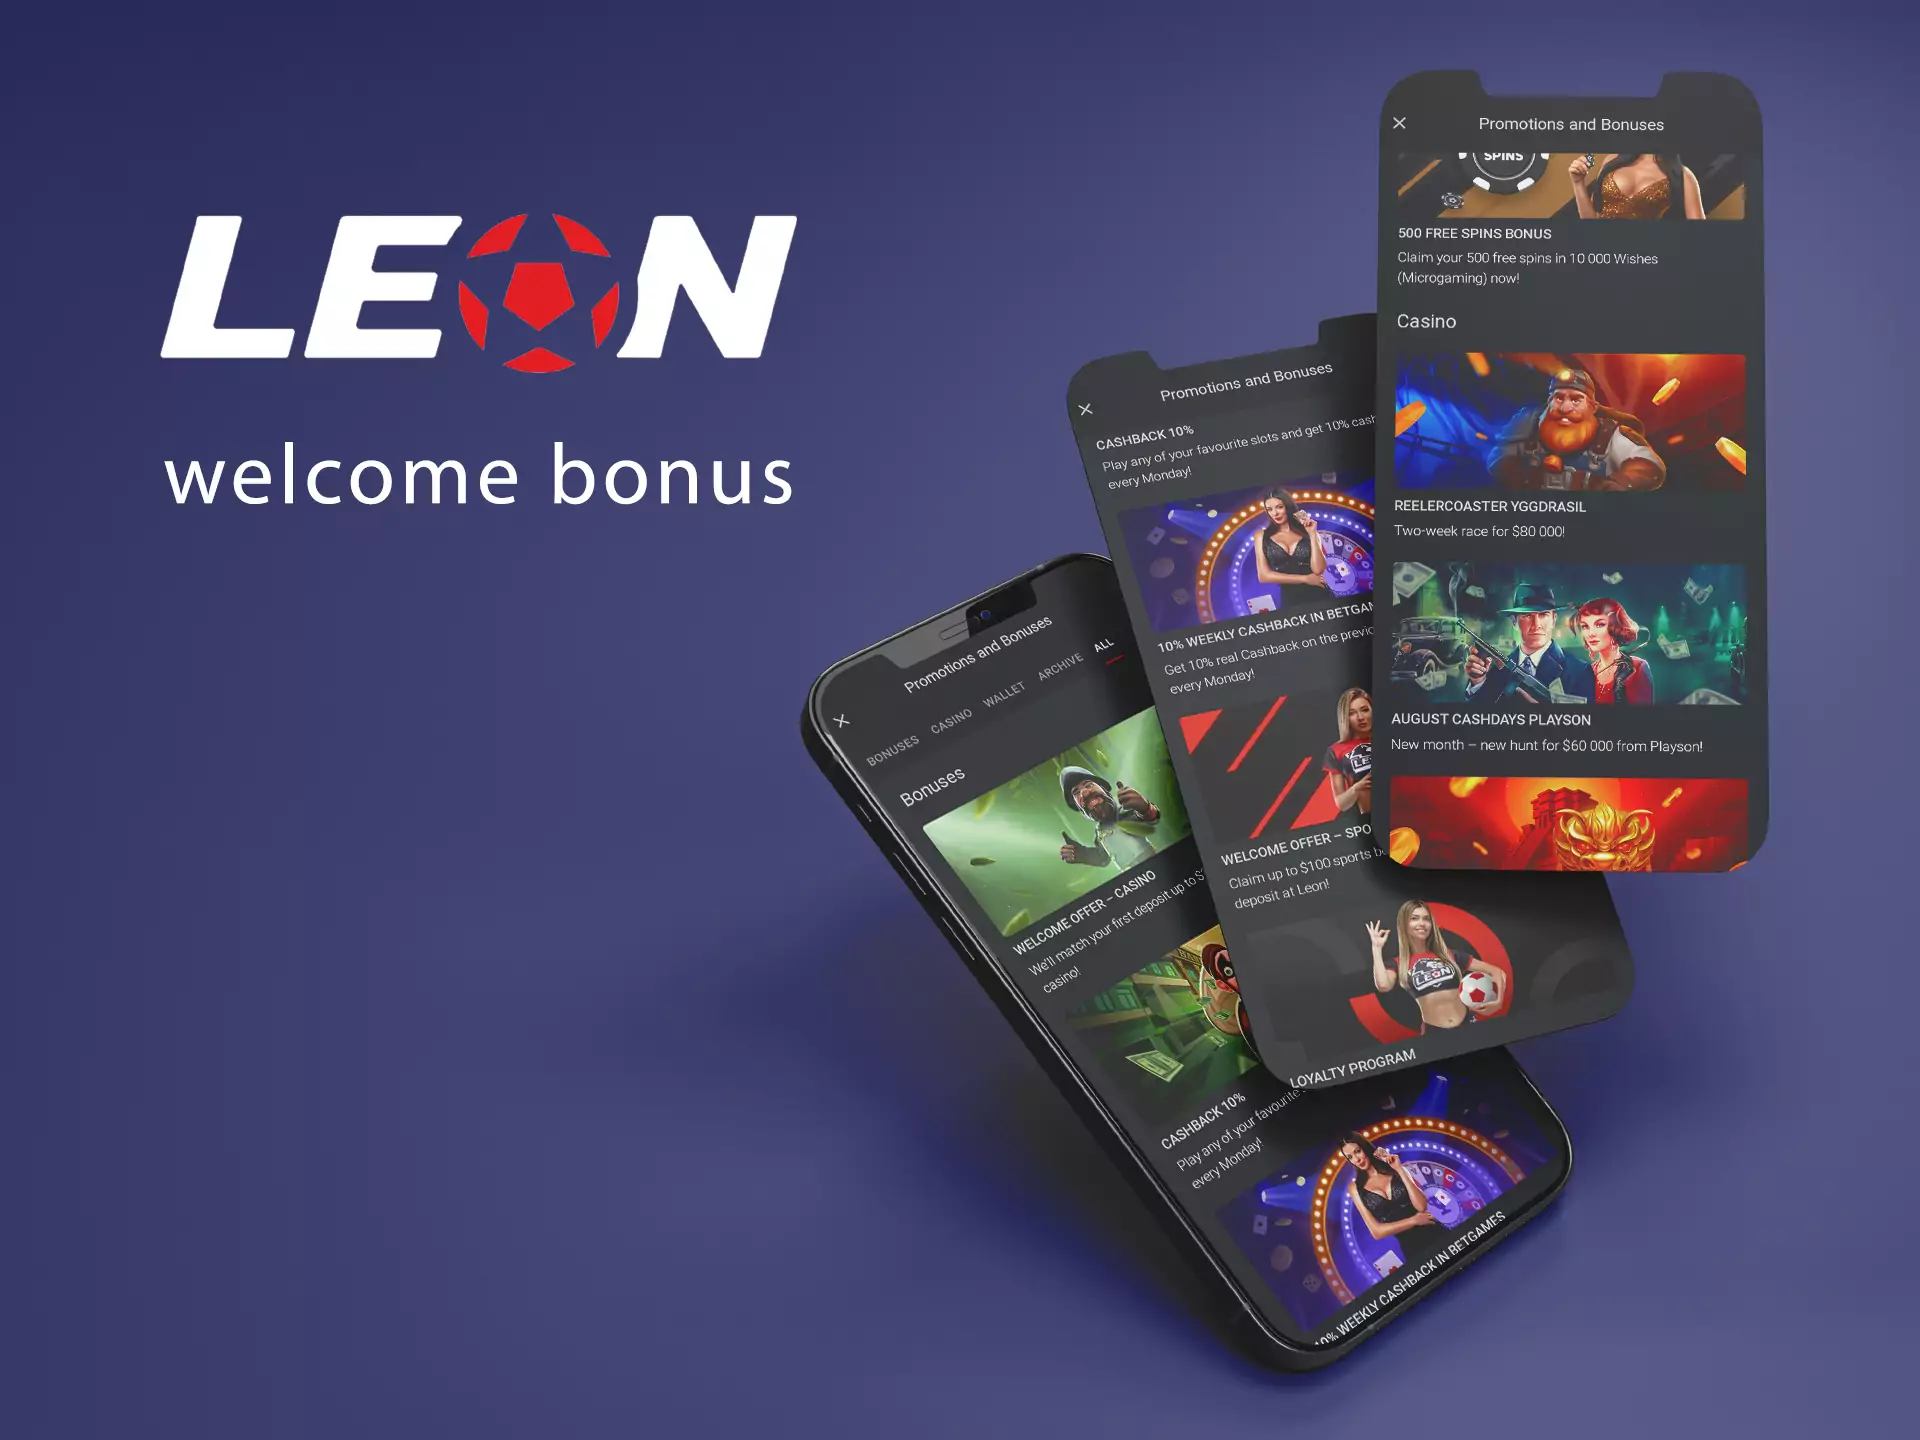 There are plenty of promotions and bonus offers for new users on Leon.